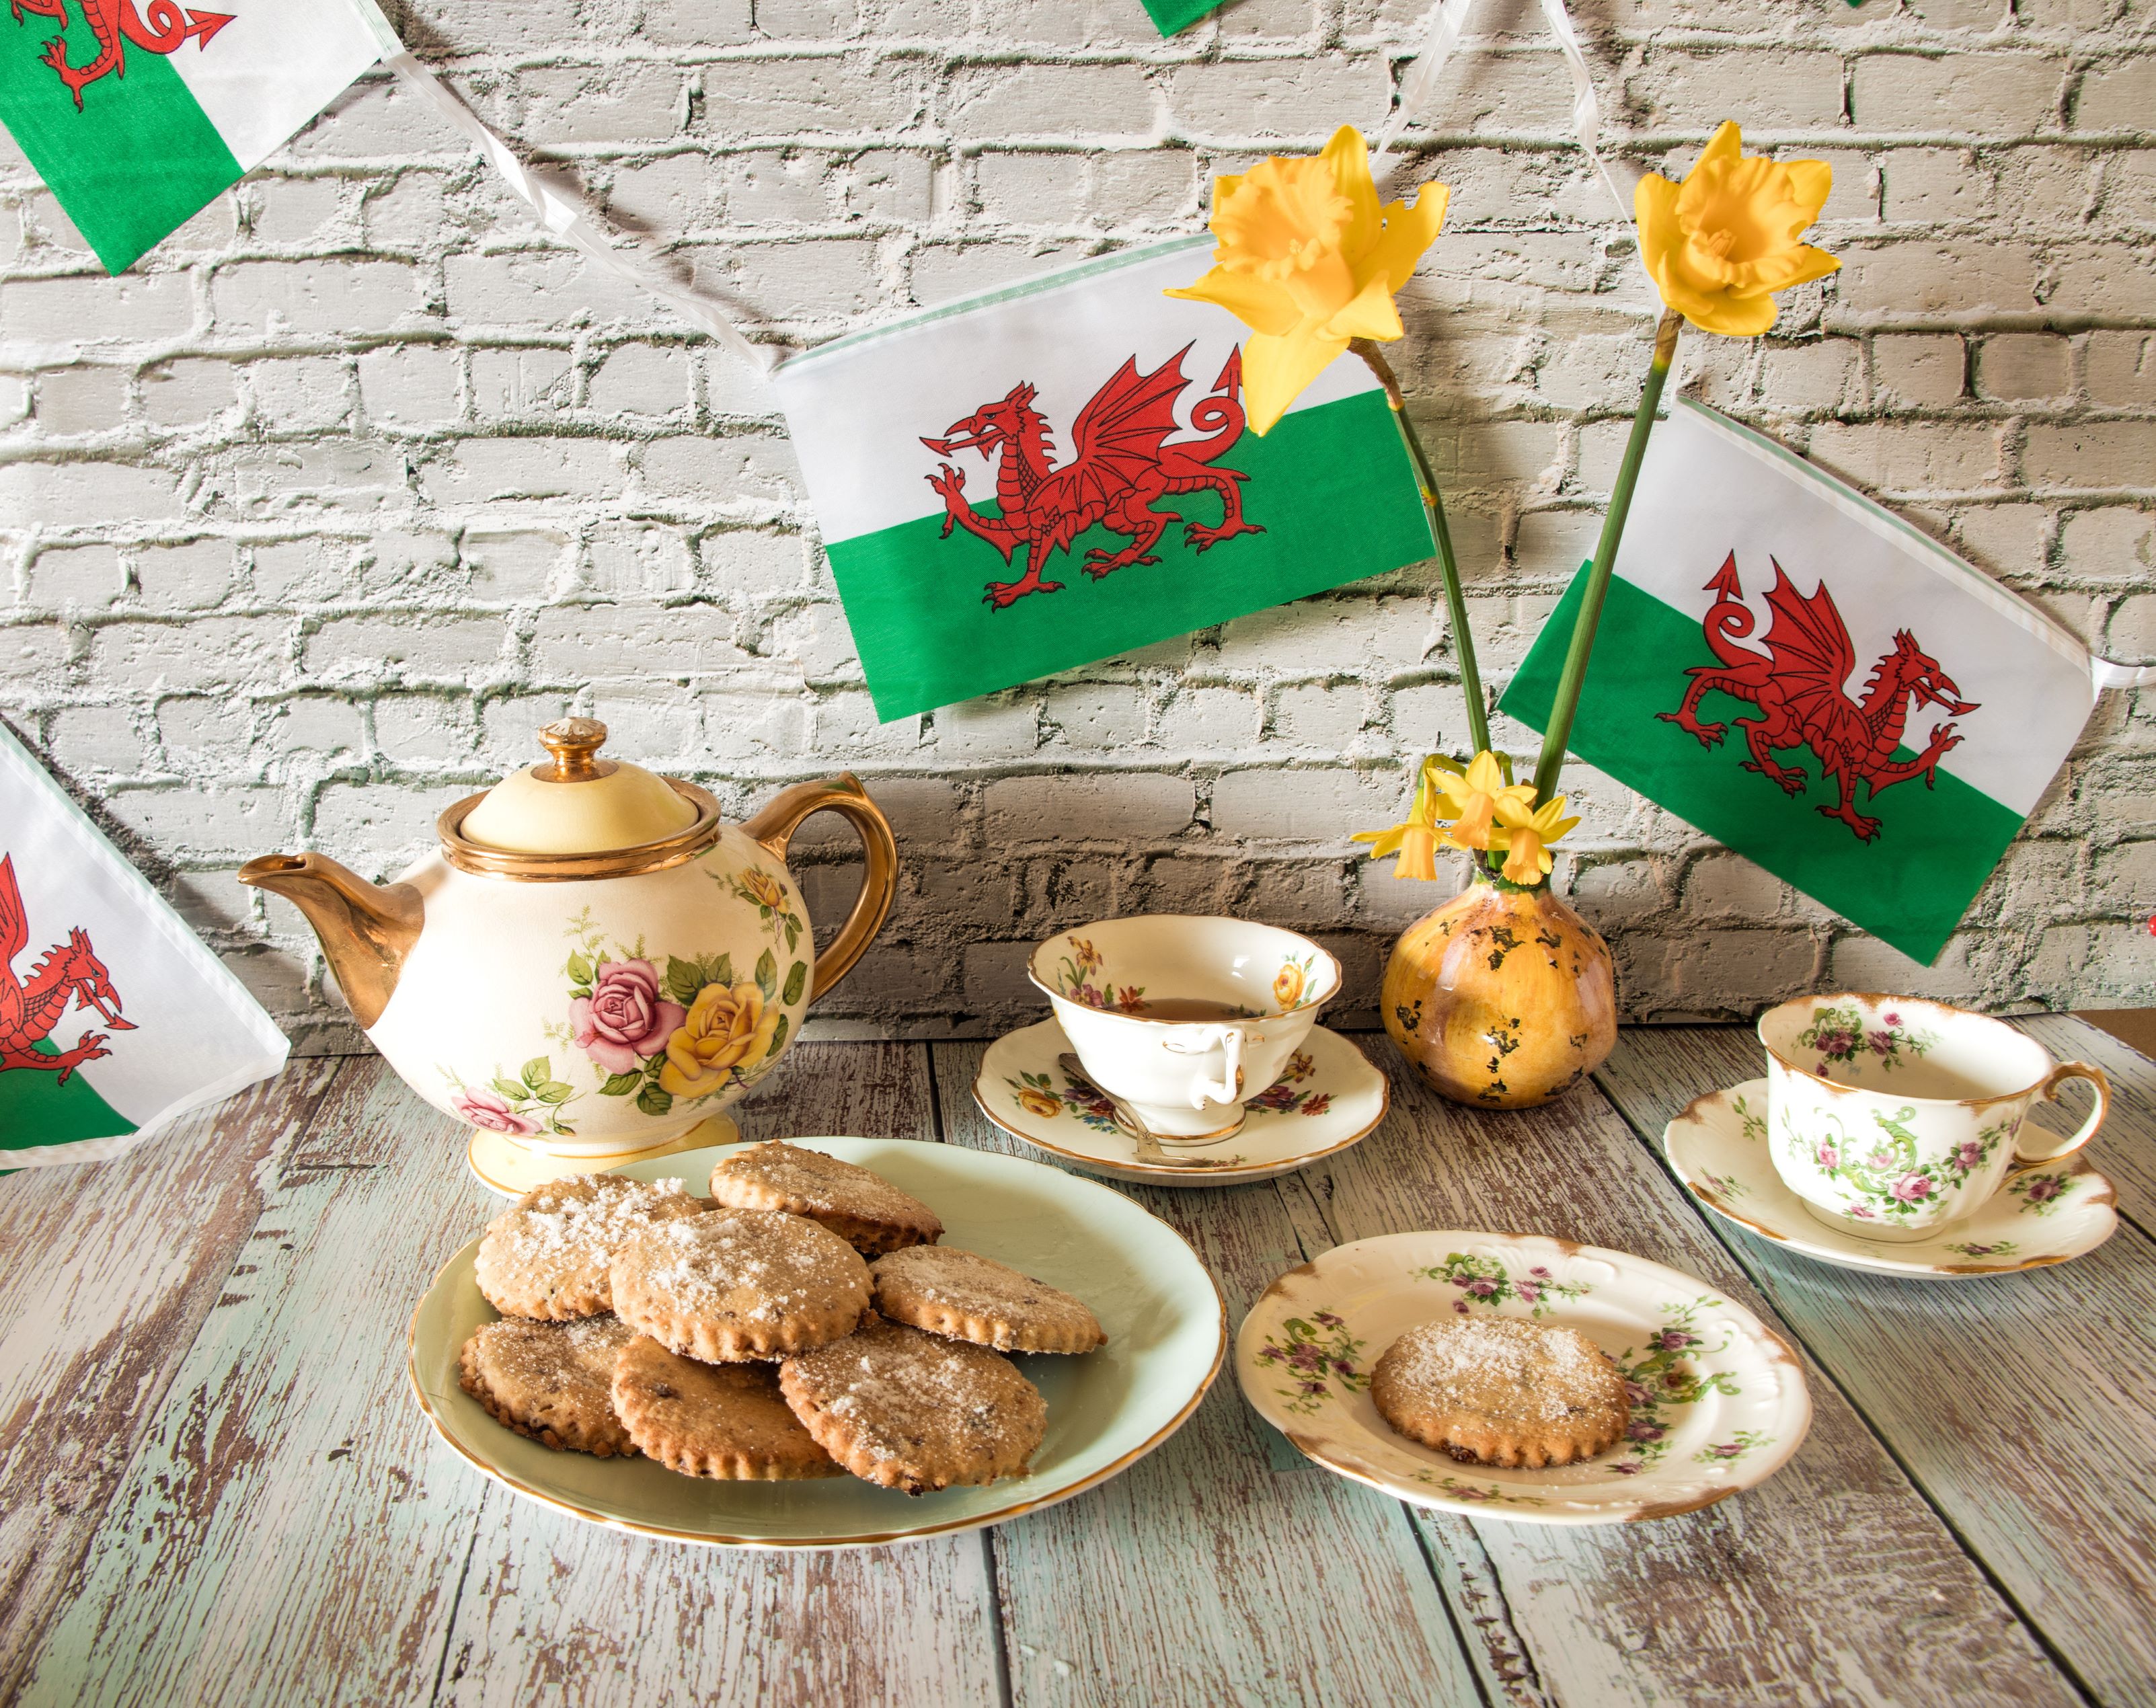 Welsh products, including Daffodils and Welsh cakes as part of a tea set with flag of Wales in background 